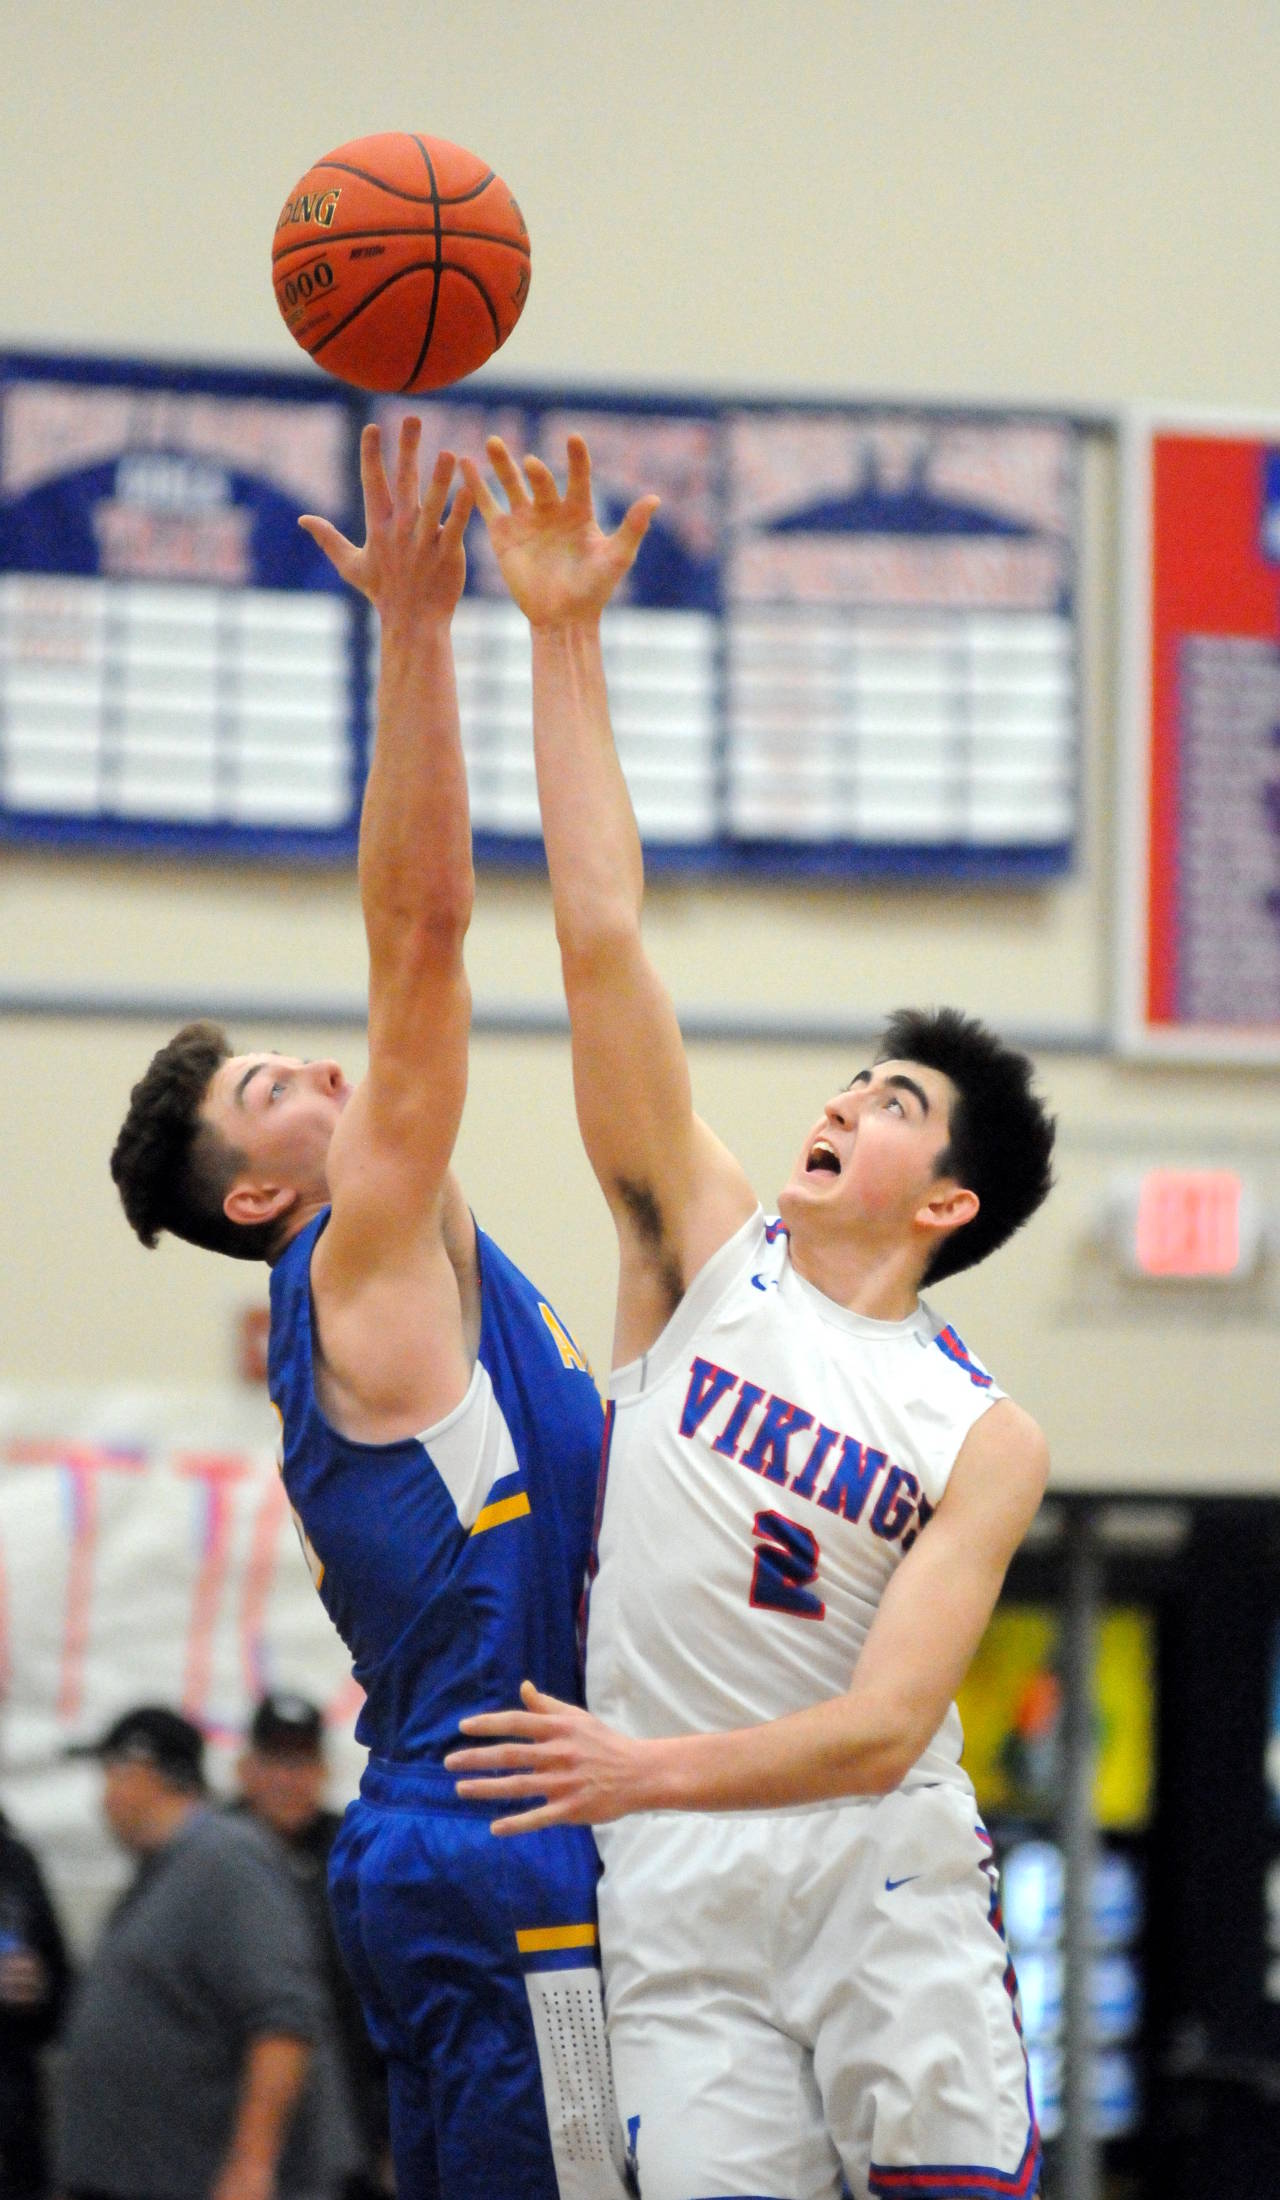 Willapa Valley’s Logan Walker (2) rises for the opening tip against Adna’s Braden Thomas during the Vikings’ 46-40 victory in the final game of the John Q. Pearson Holiday Classic on Saturday at Willapa Valley High School. (Ryan Sparks | Grays Harbor News Group)